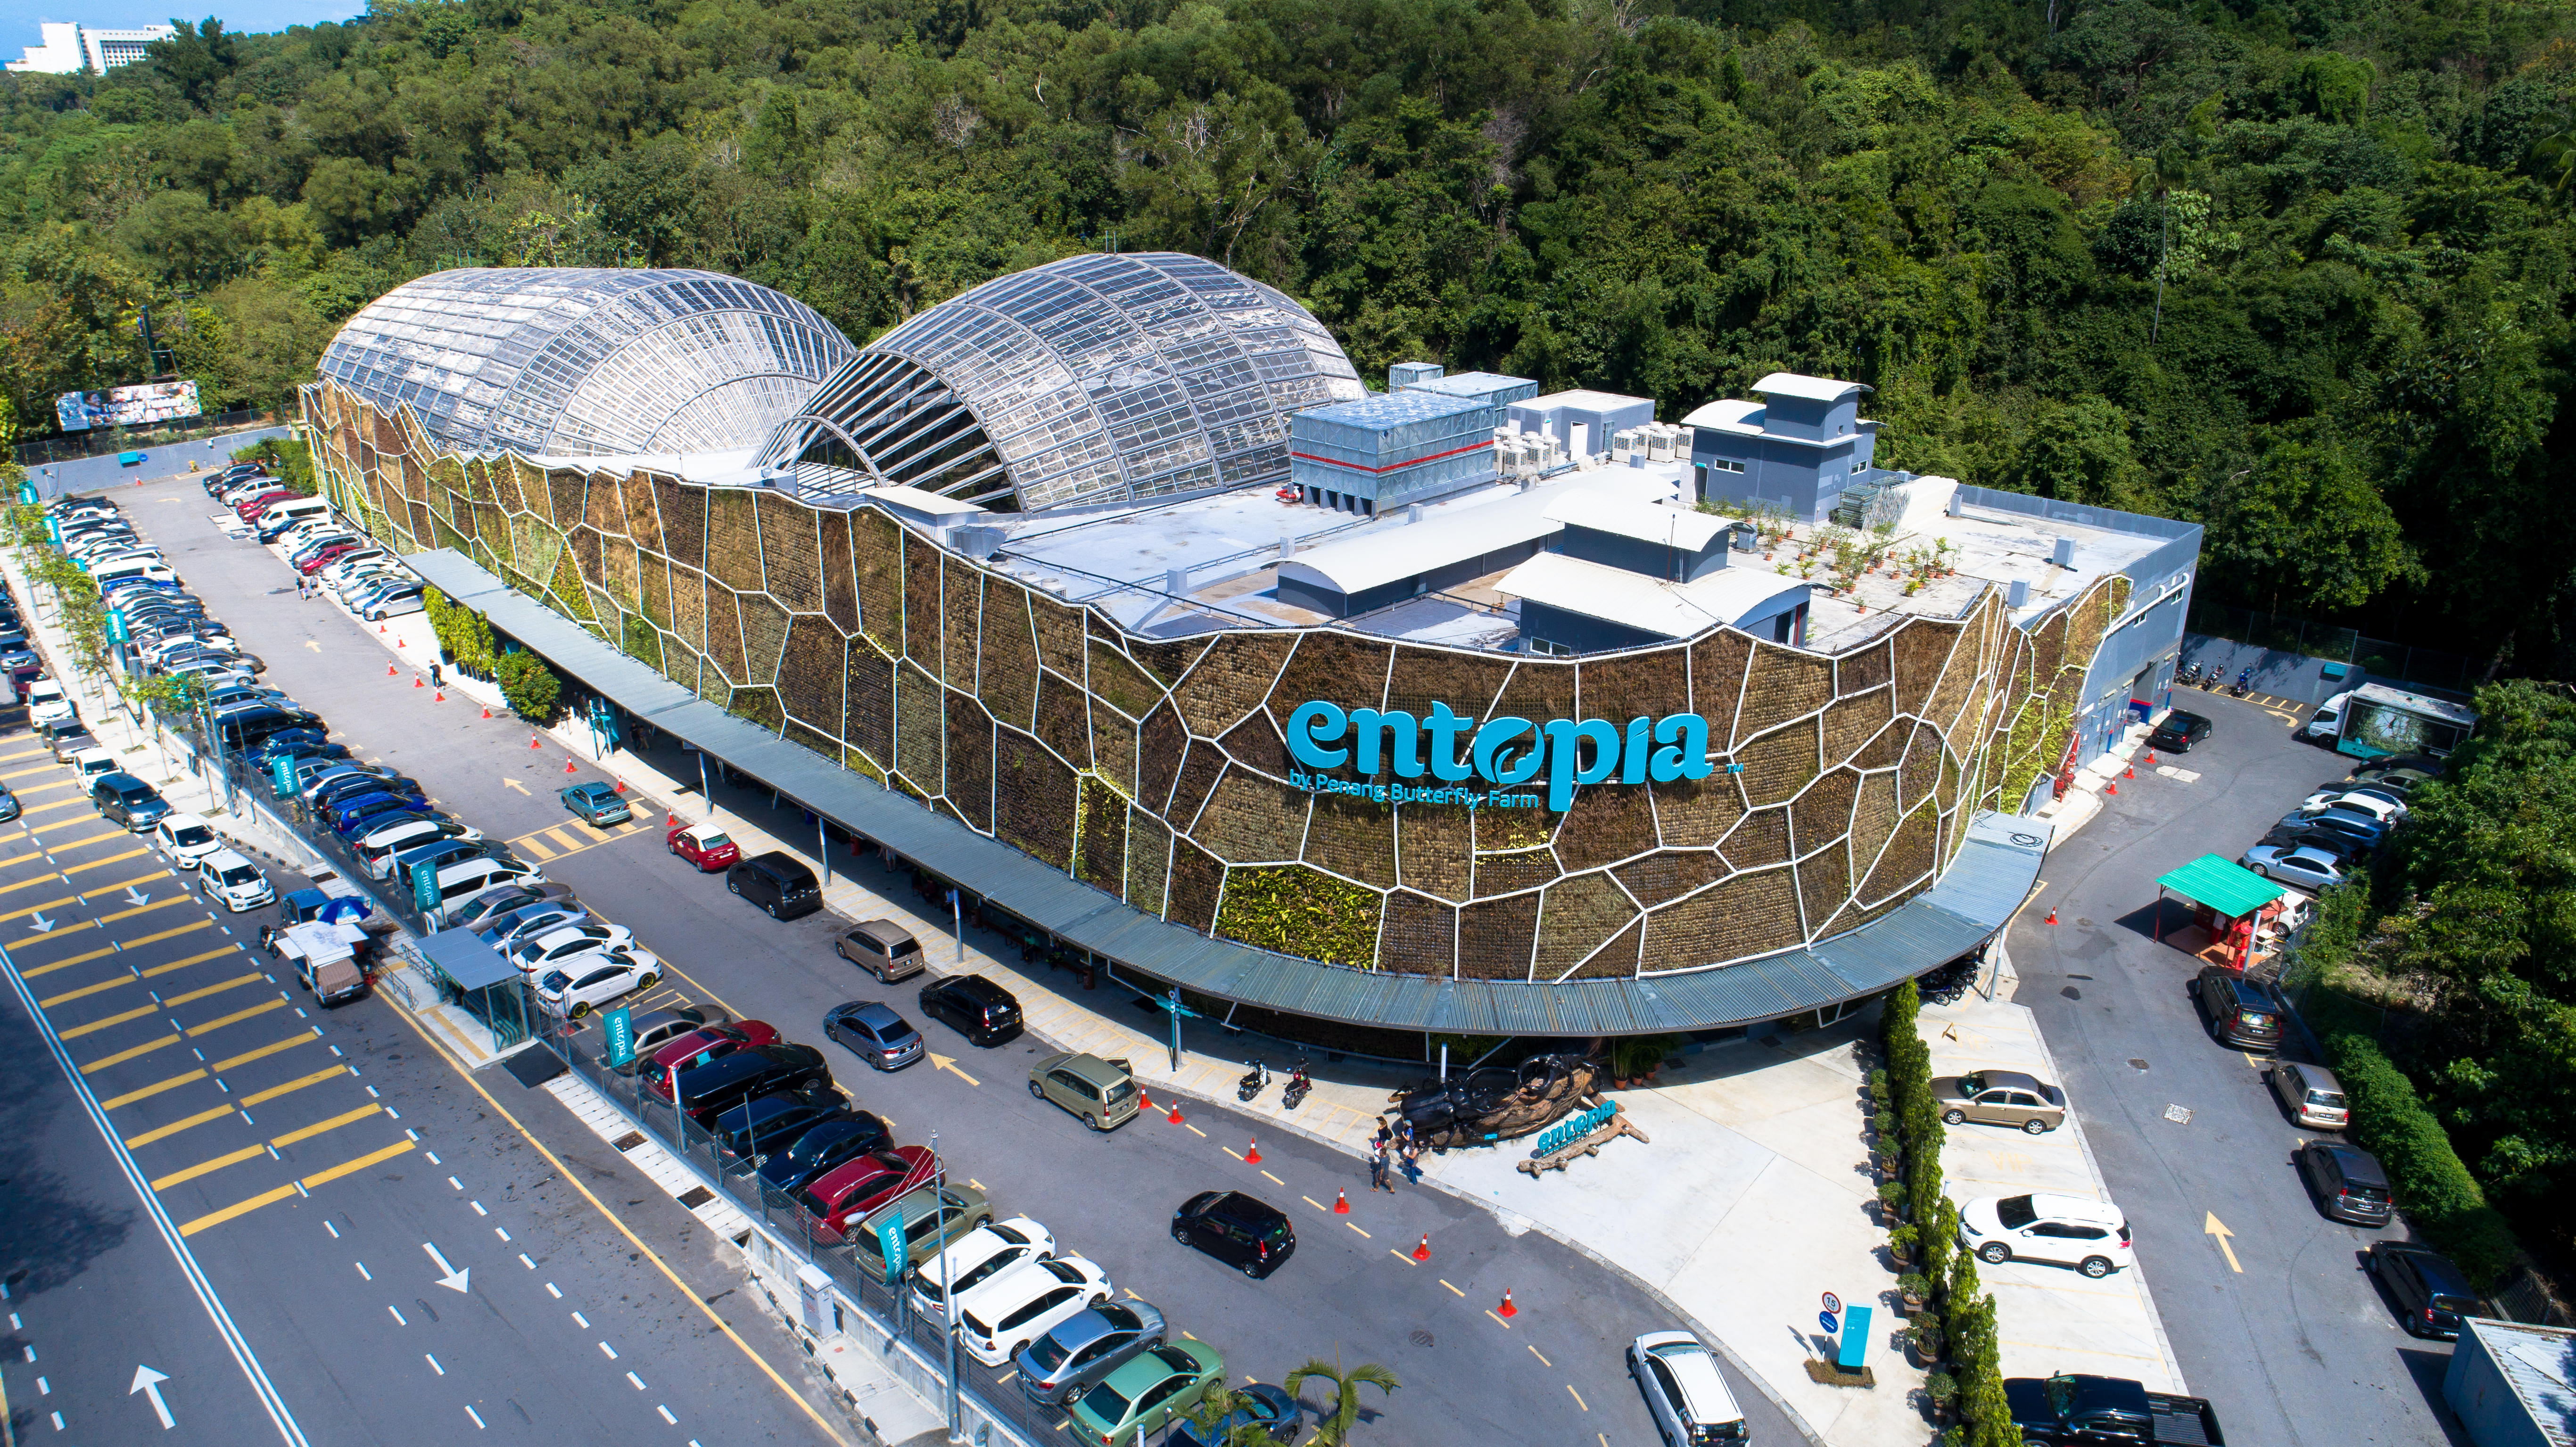 Visit Entopia one of the largest butterfly farms in Malaysia